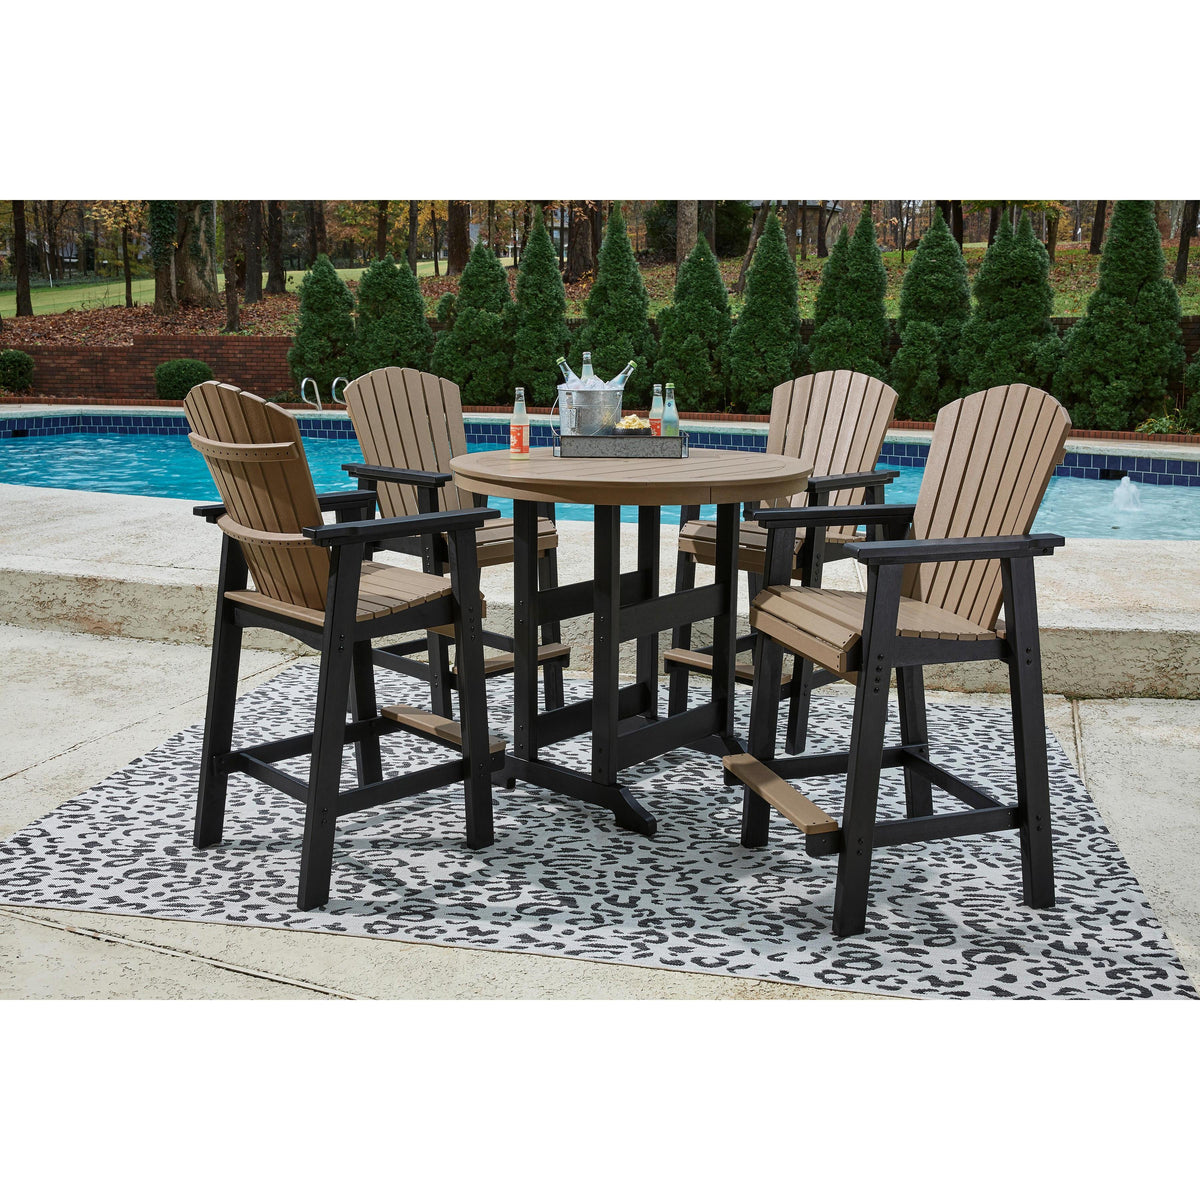 Signature Design by Ashley Fairen Trail P211 5 pc Outdoor Dining Set